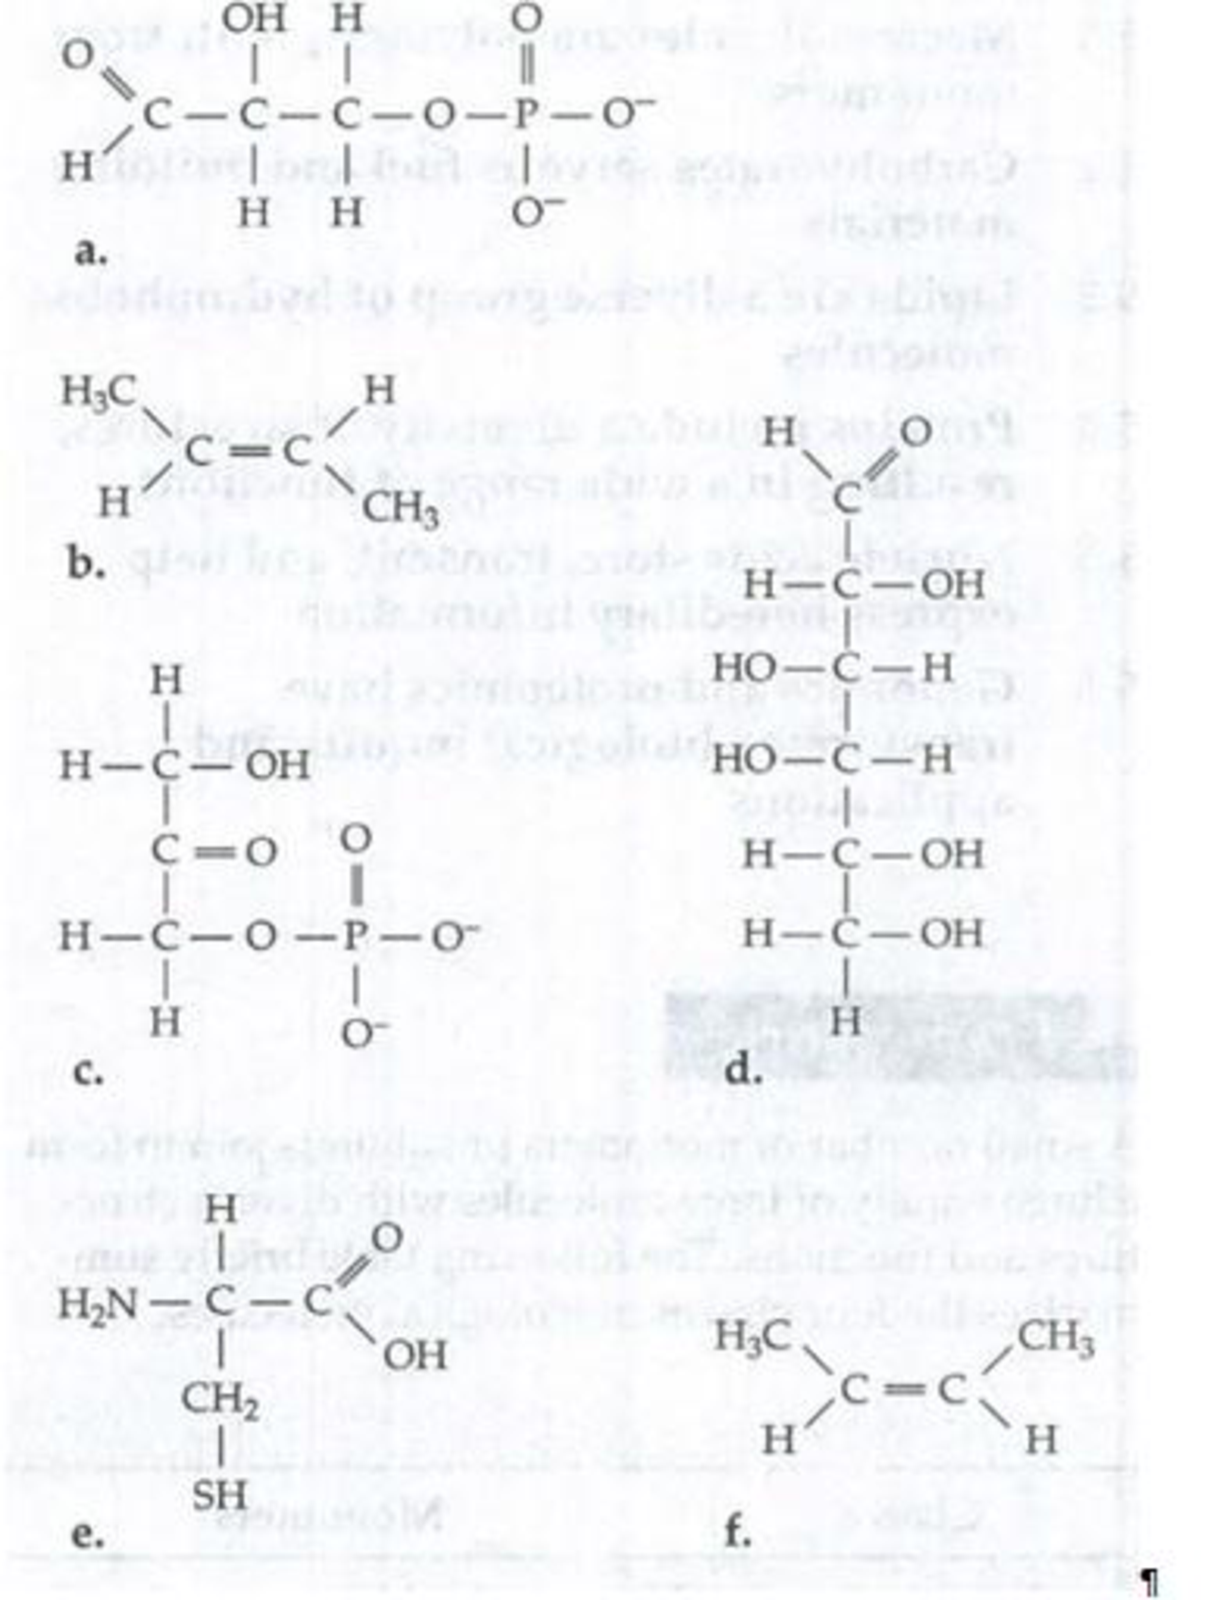 Chapter 4, Problem 7TYKM, hydrocarbon 